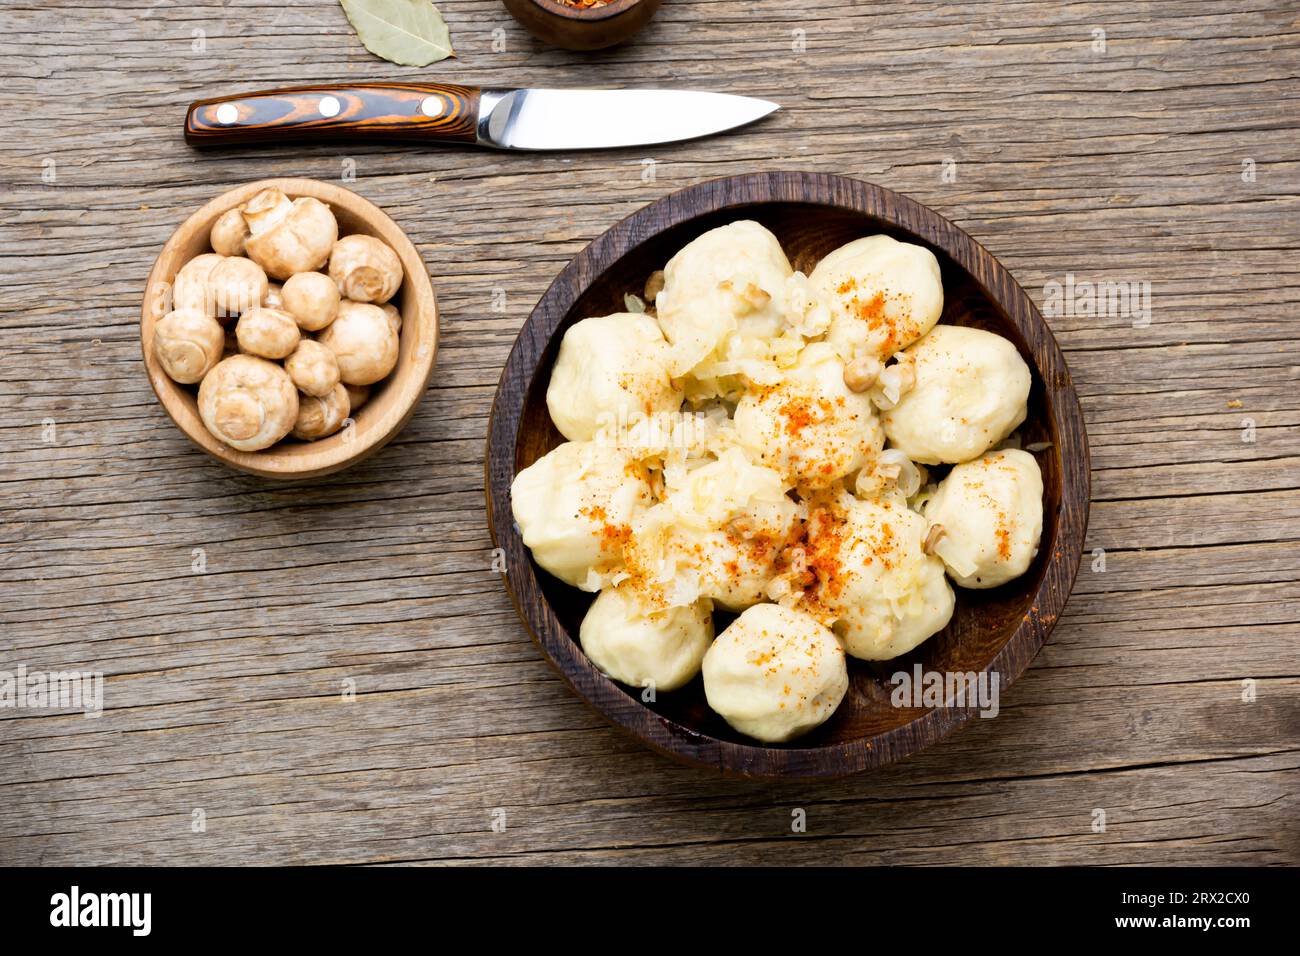 Uncooked knedliki, made from dough, potatoes with mushroom filling. Traditional Czech cuisine Stock Photo